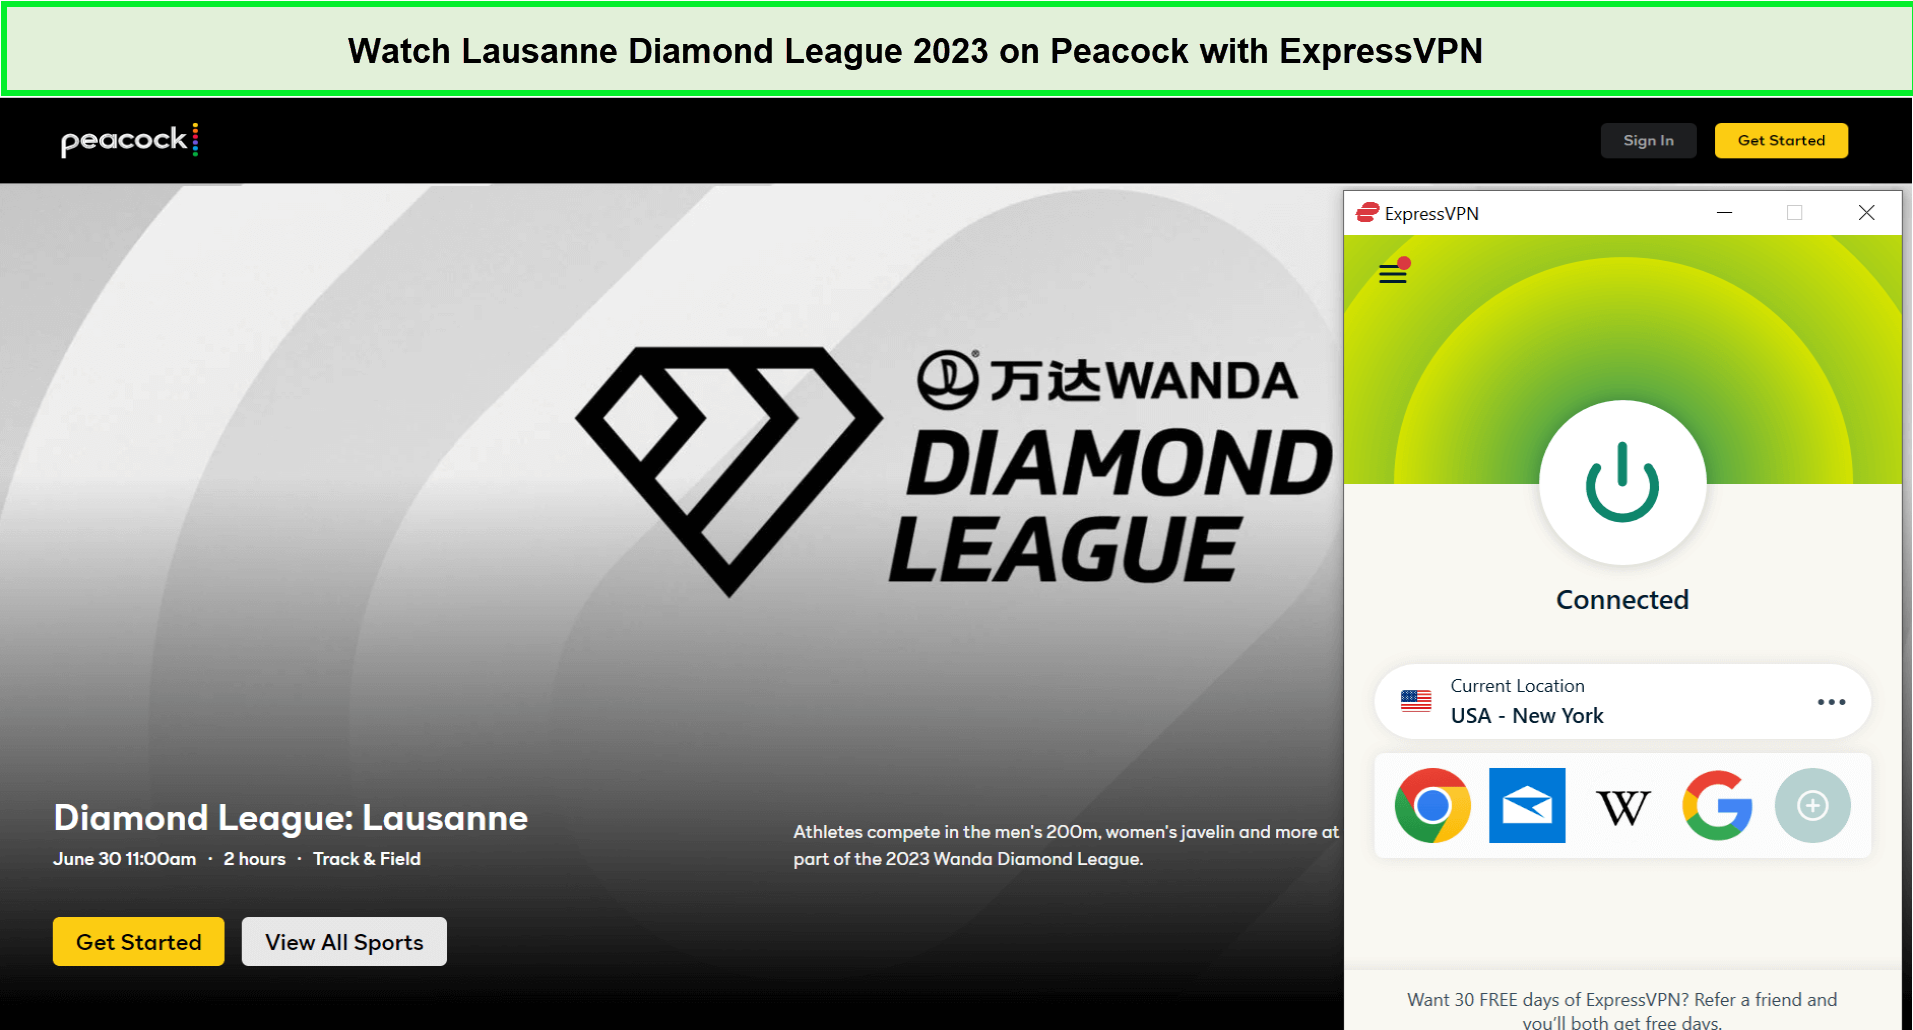 Watch-Lausanne-Diamond-League-2023-in-Canada-on-Peacock-with-ExpressVPN